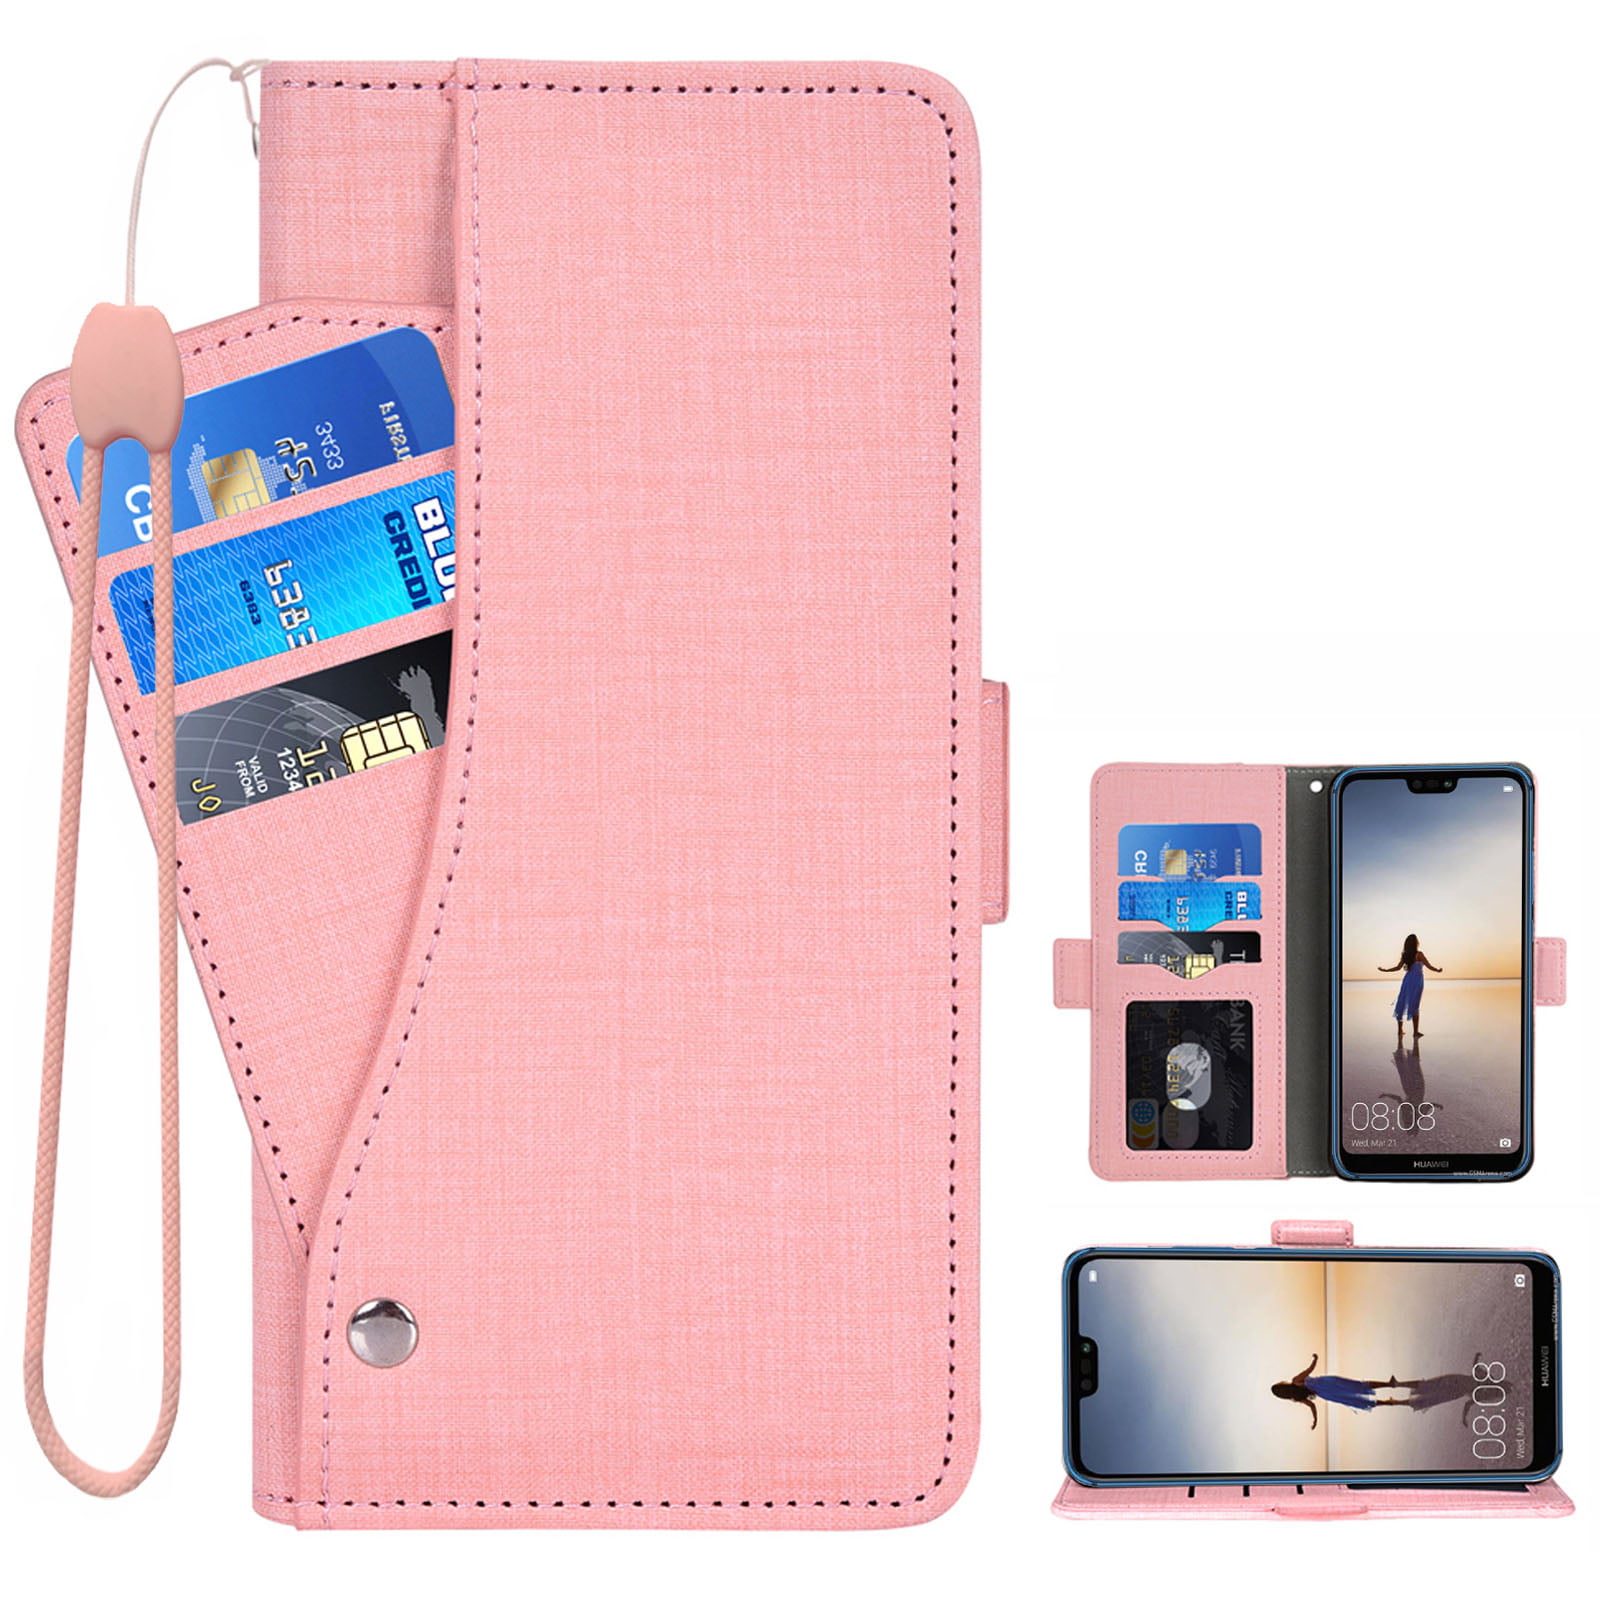 Simple-Style Leather Case for Huawei P20 lite Flip Cover fit for Huawei P20 lite Business Gifts